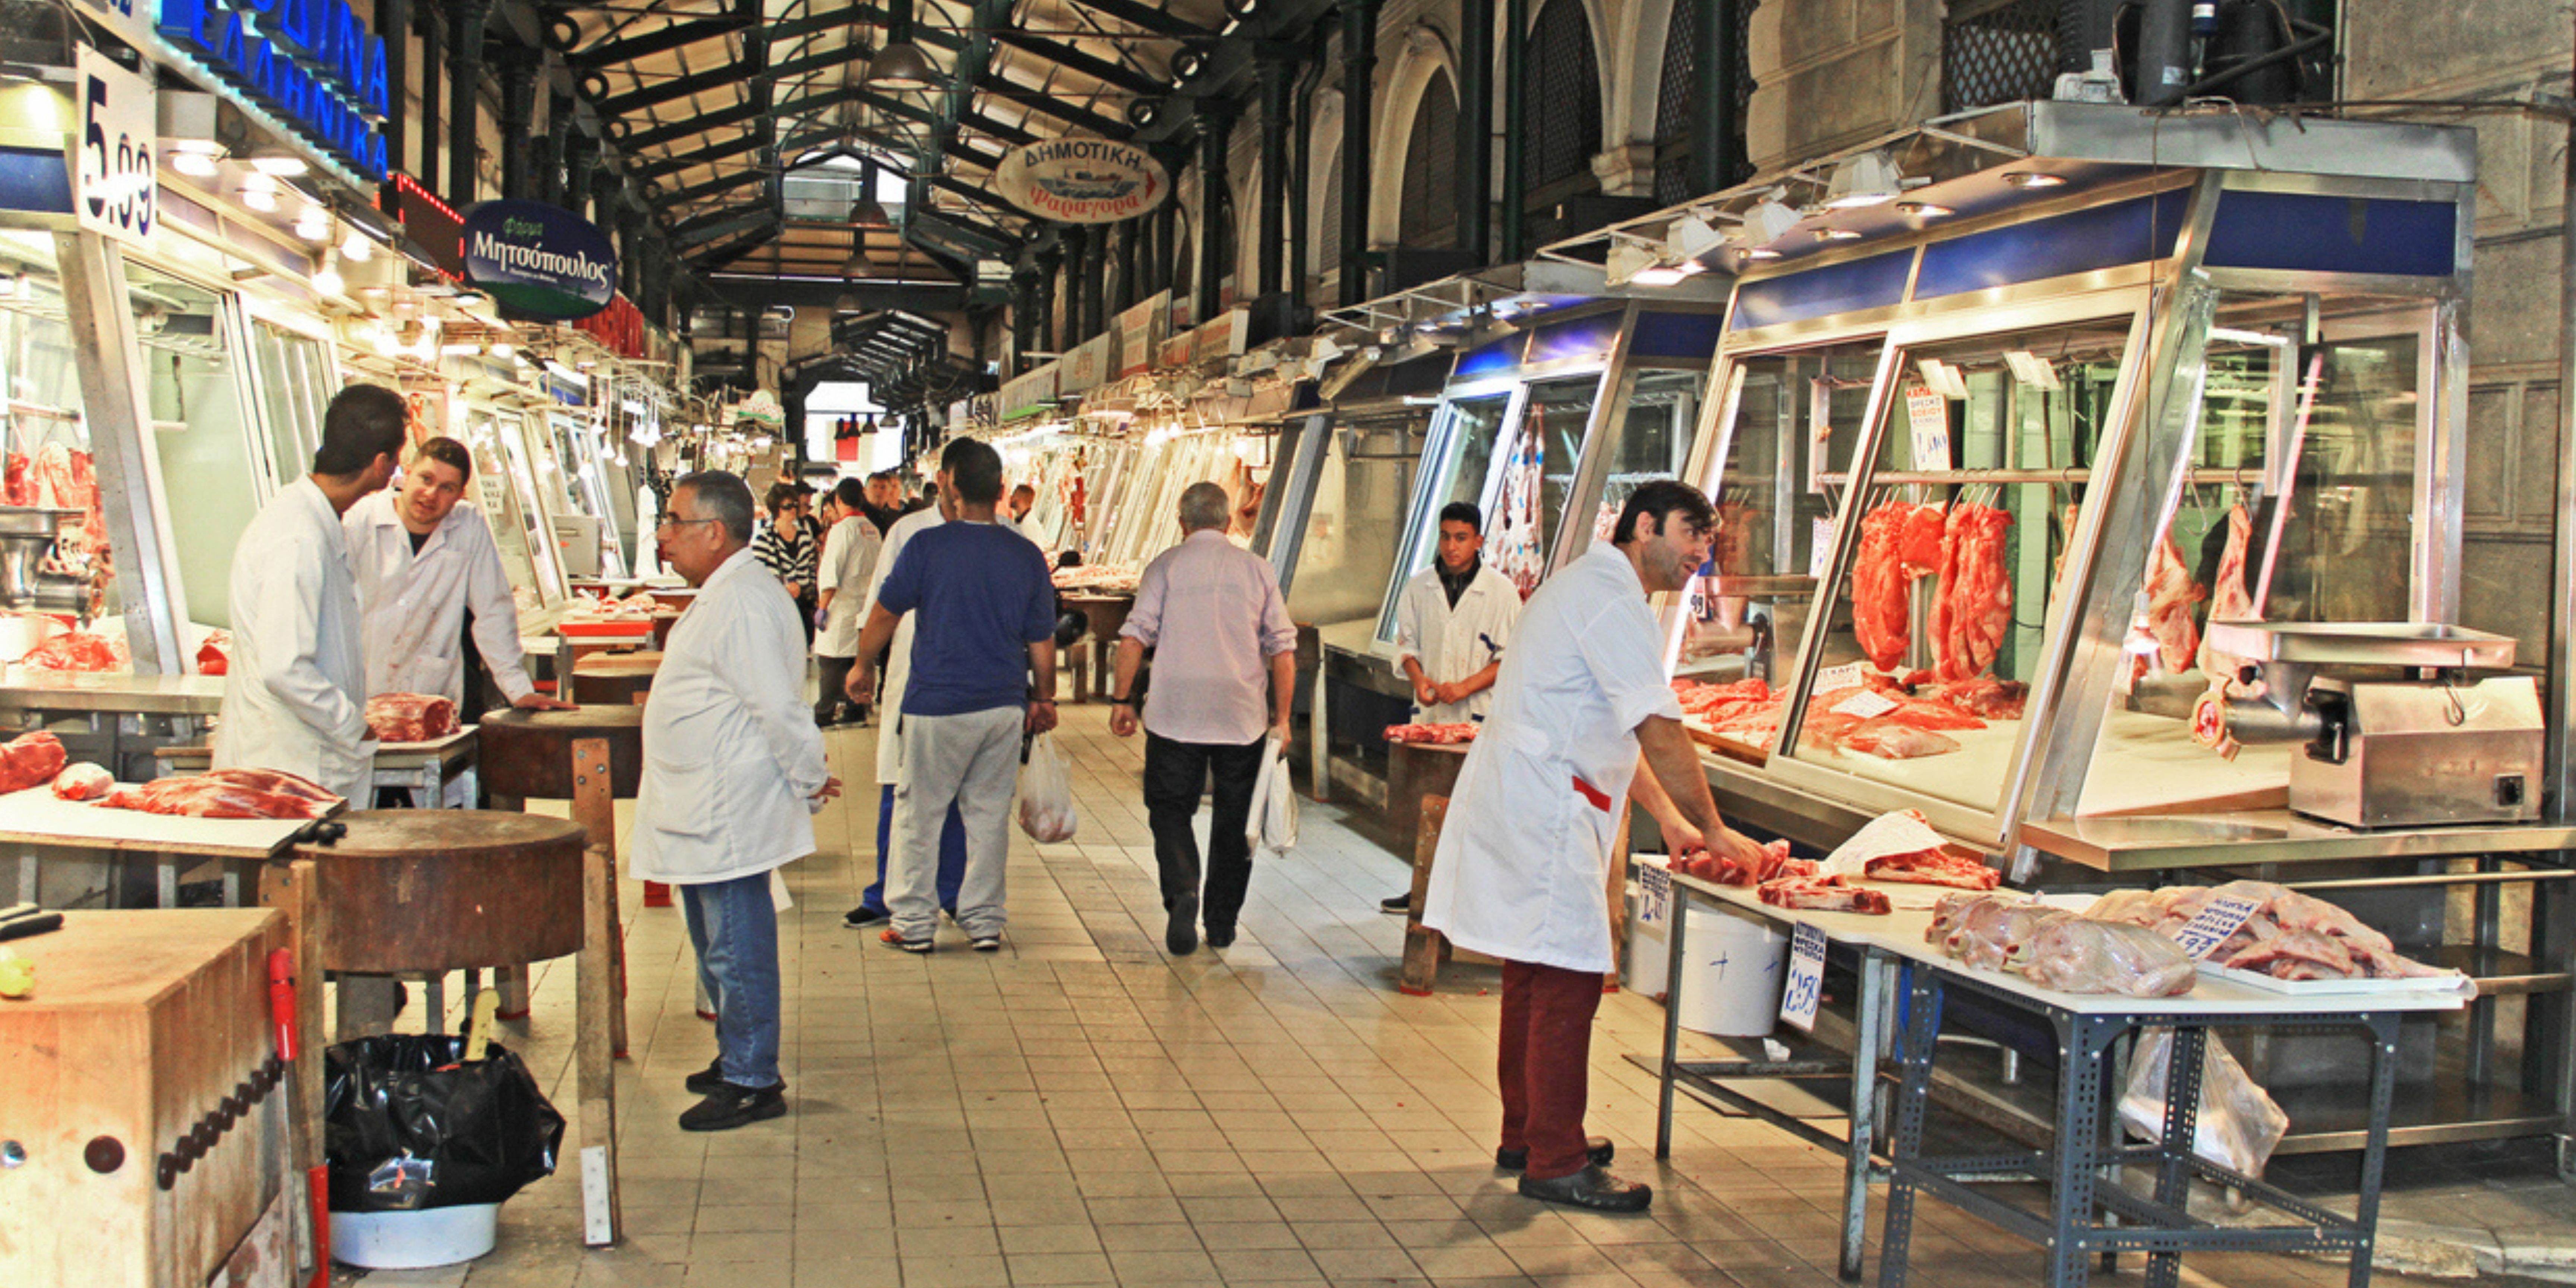 Butchers and customers at the meat section of Varvakios Market in Athens.